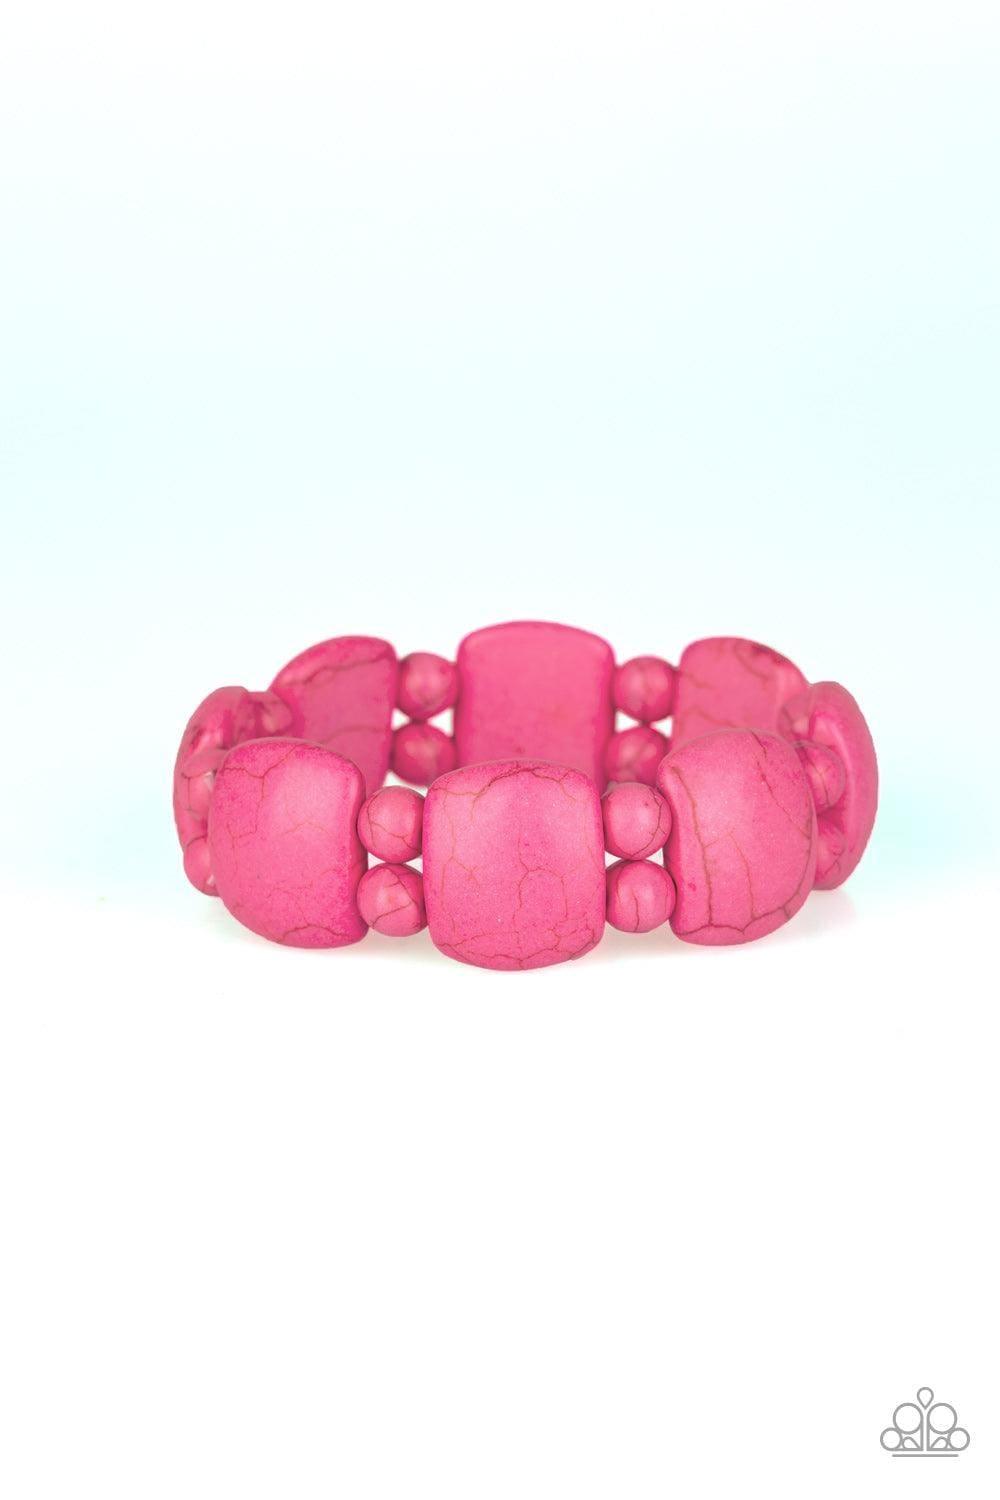 Paparazzi Accessories - Don't Be So Nomadic! - Pink Bracelet - Bling by JessieK